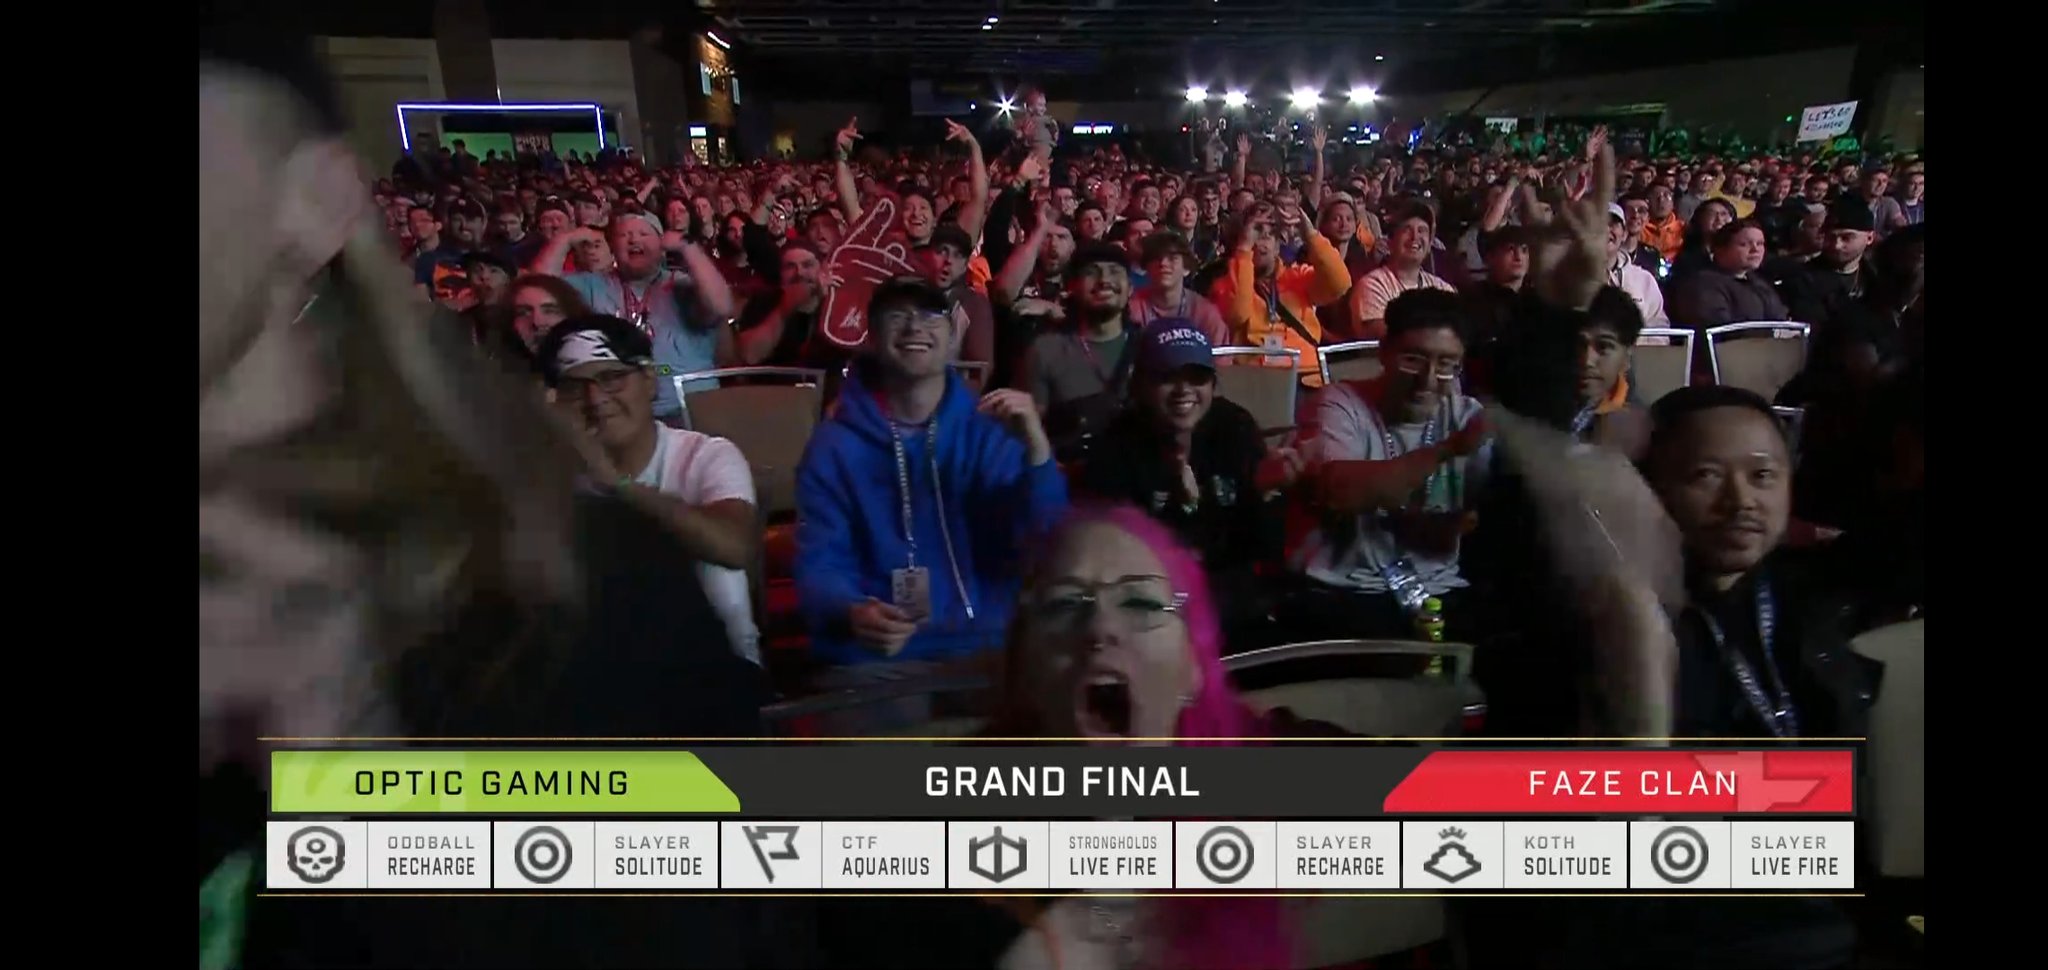 Image of LaSinity reacting in the crowd to the HaloWC grand final between Optic Gaming and Faze Clan